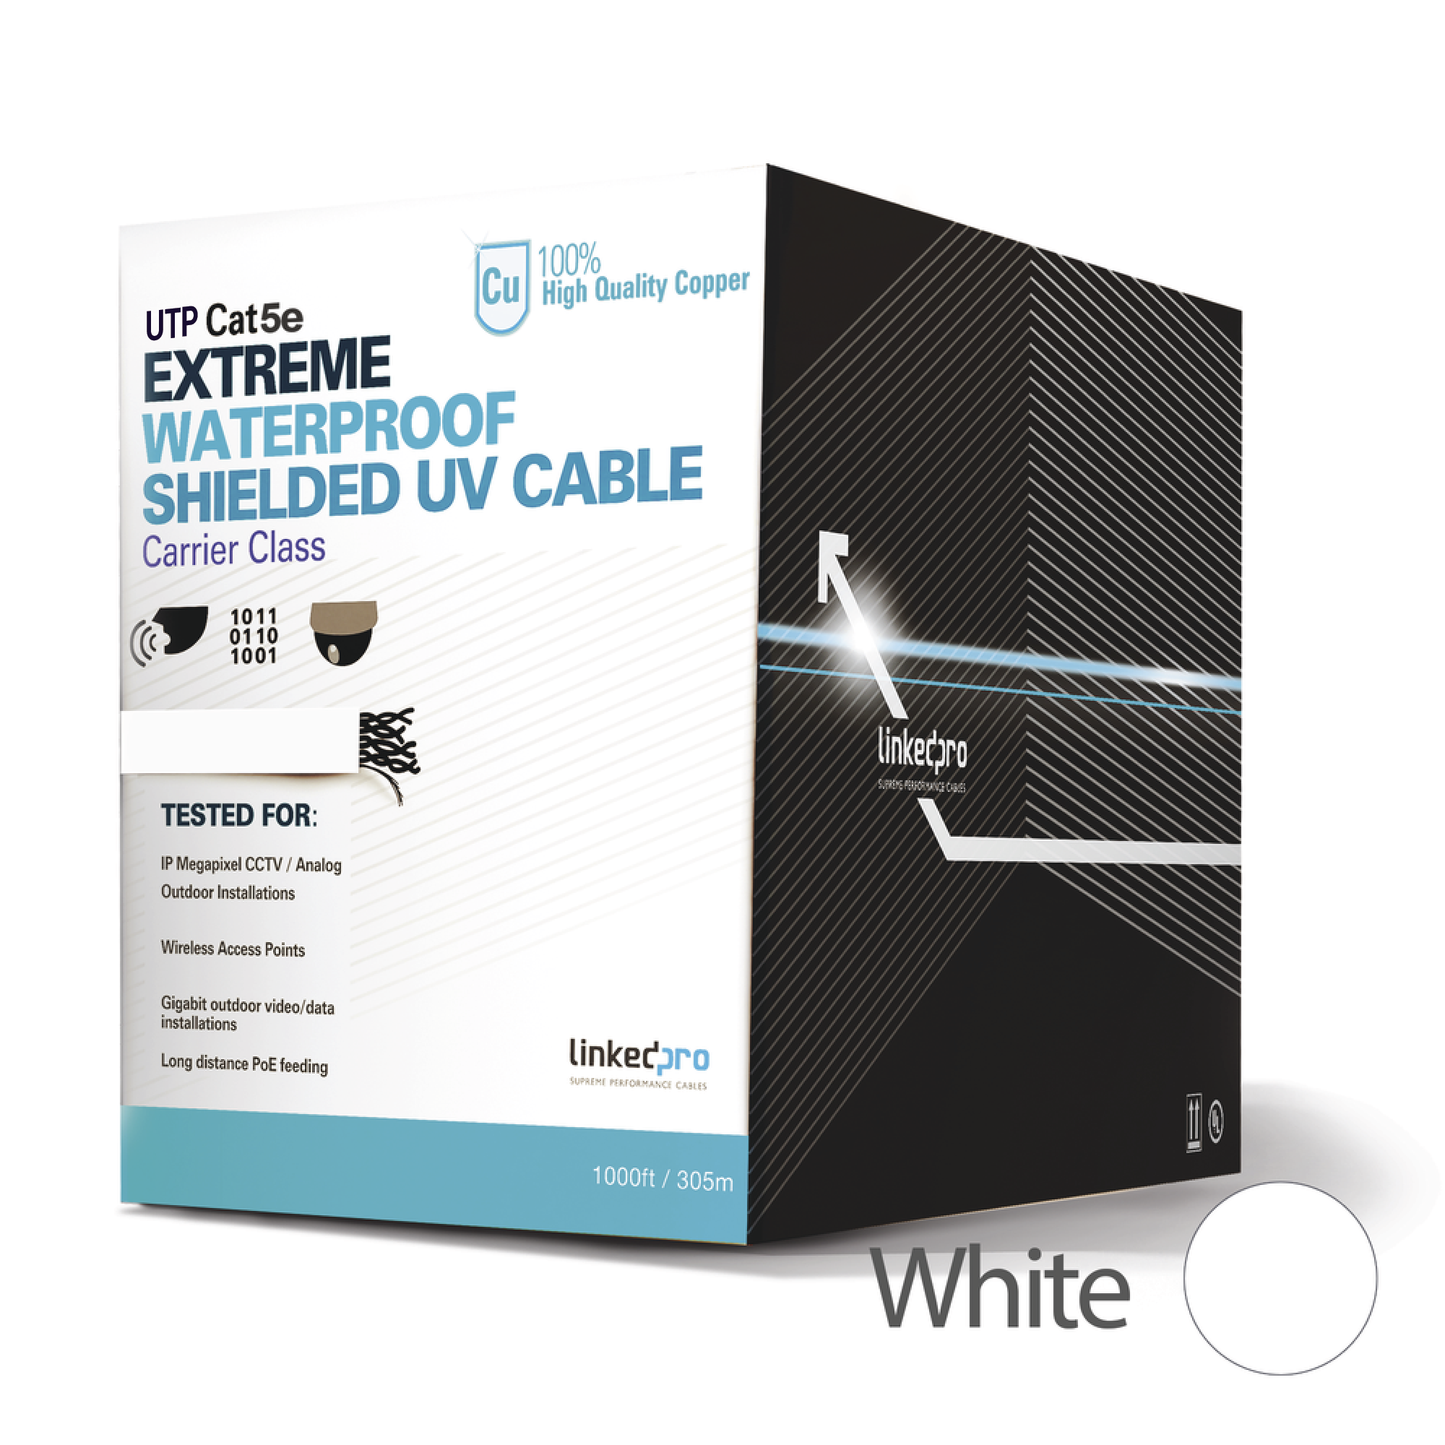 Cat5e 1000 ft, Outdoor, UV shielded , White color, for Video Surveillance and Data Networks.